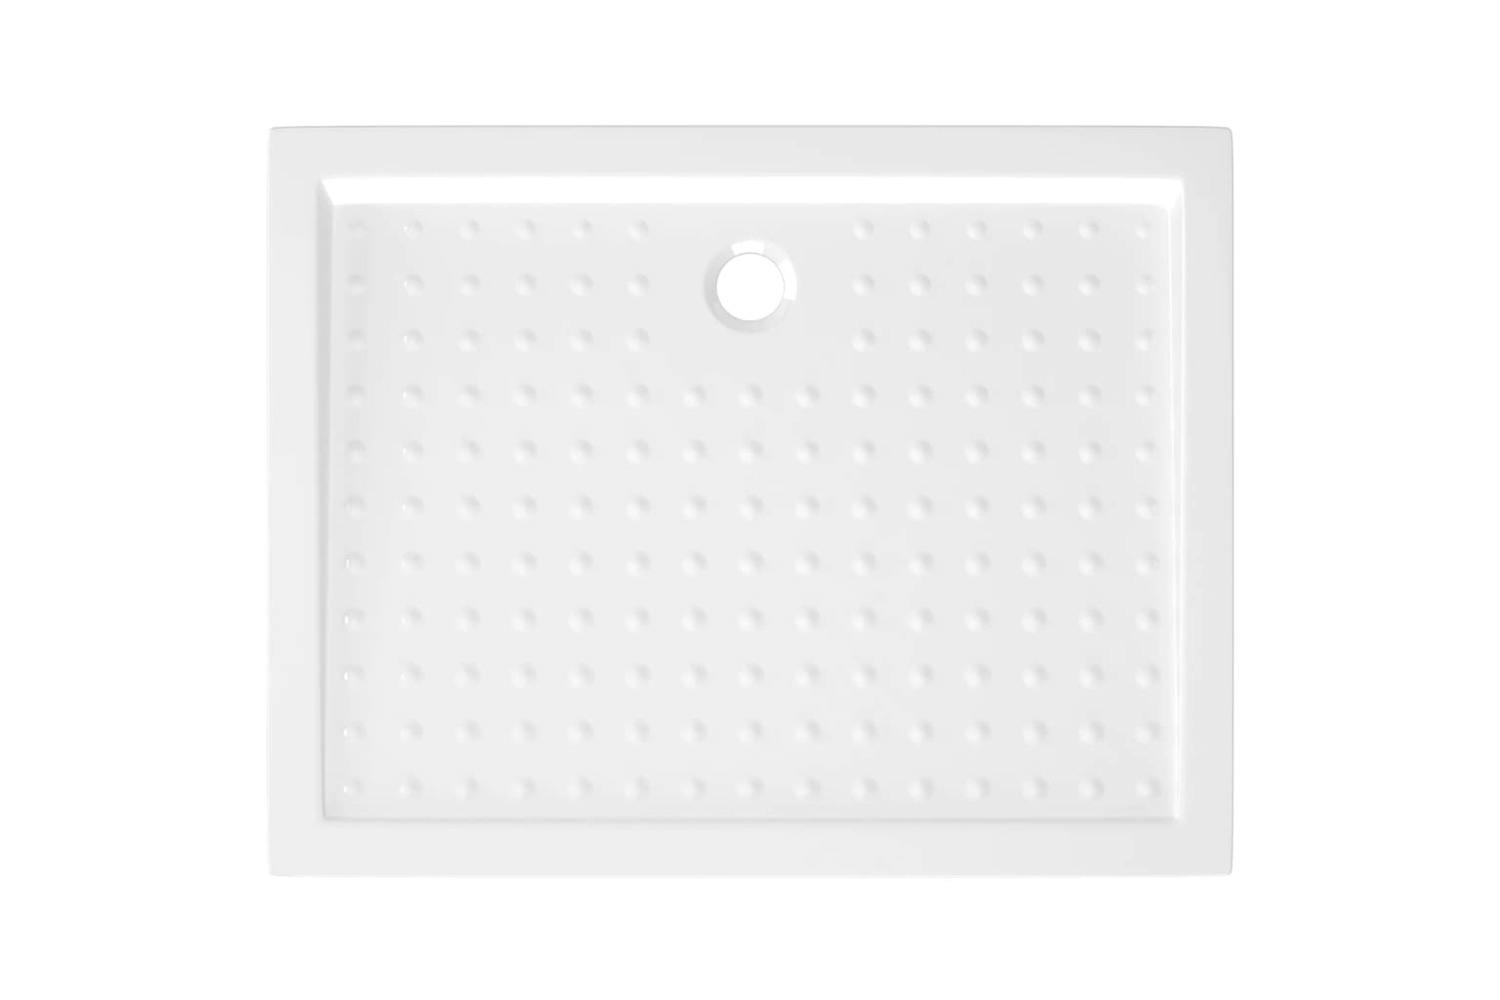 Vidaxl 148896 Shower Base Tray With Dots White 90x70x4 Cm Abs